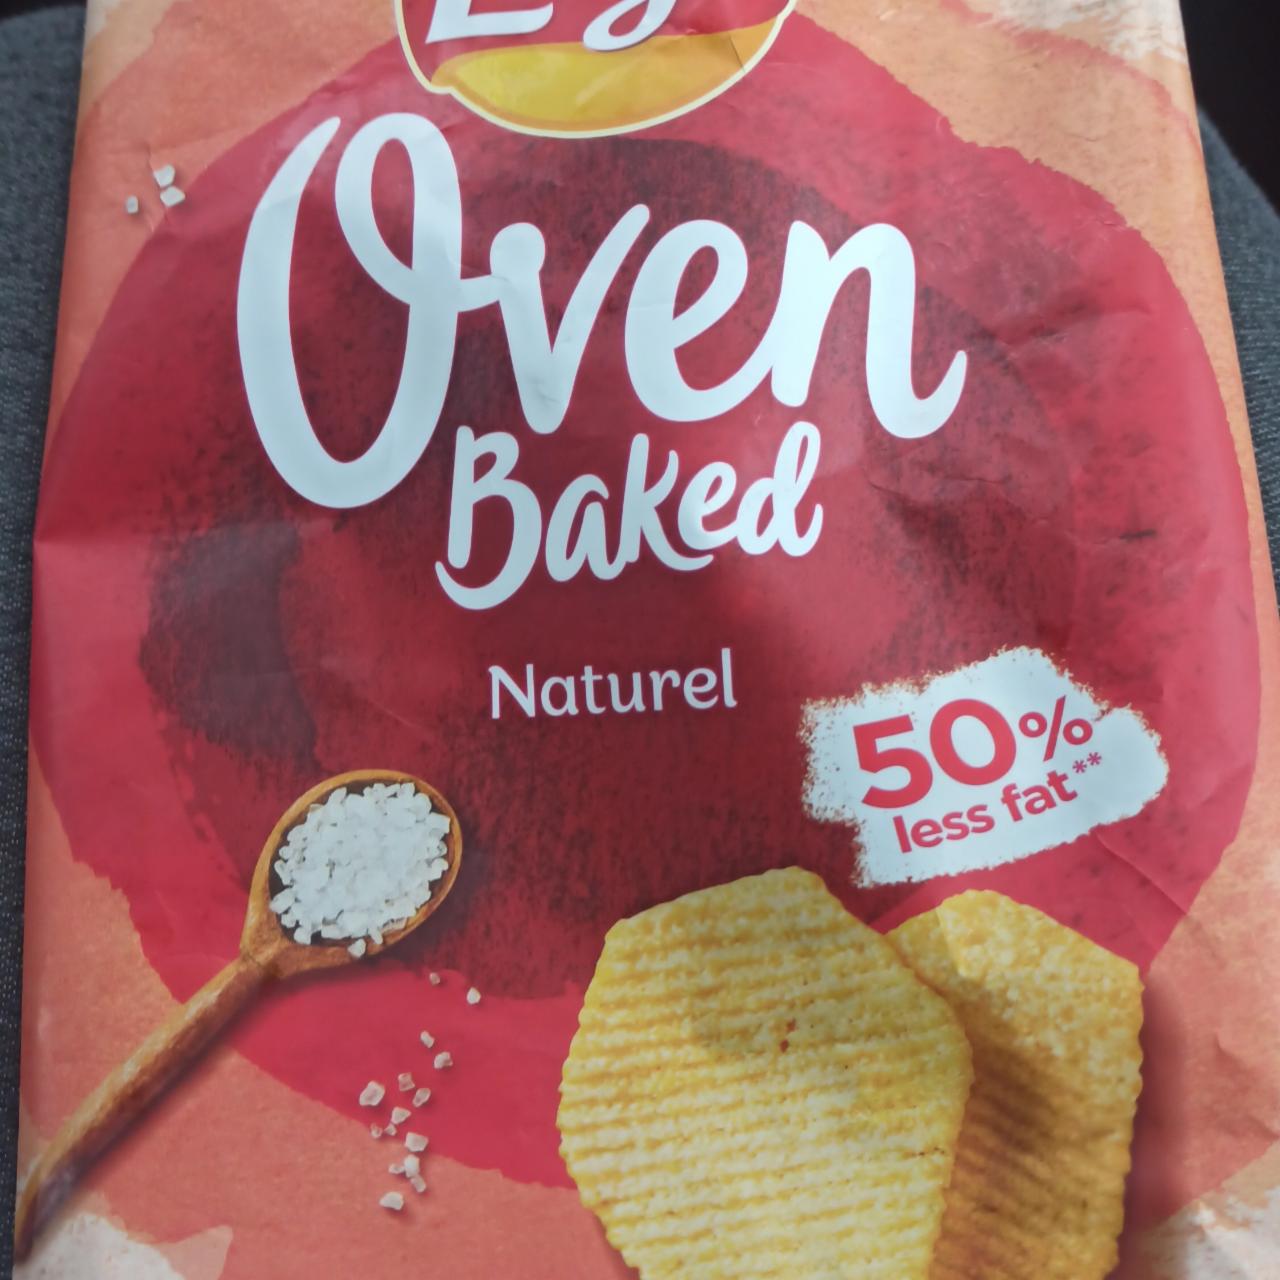 Фото - Oven baked naturel Lay's